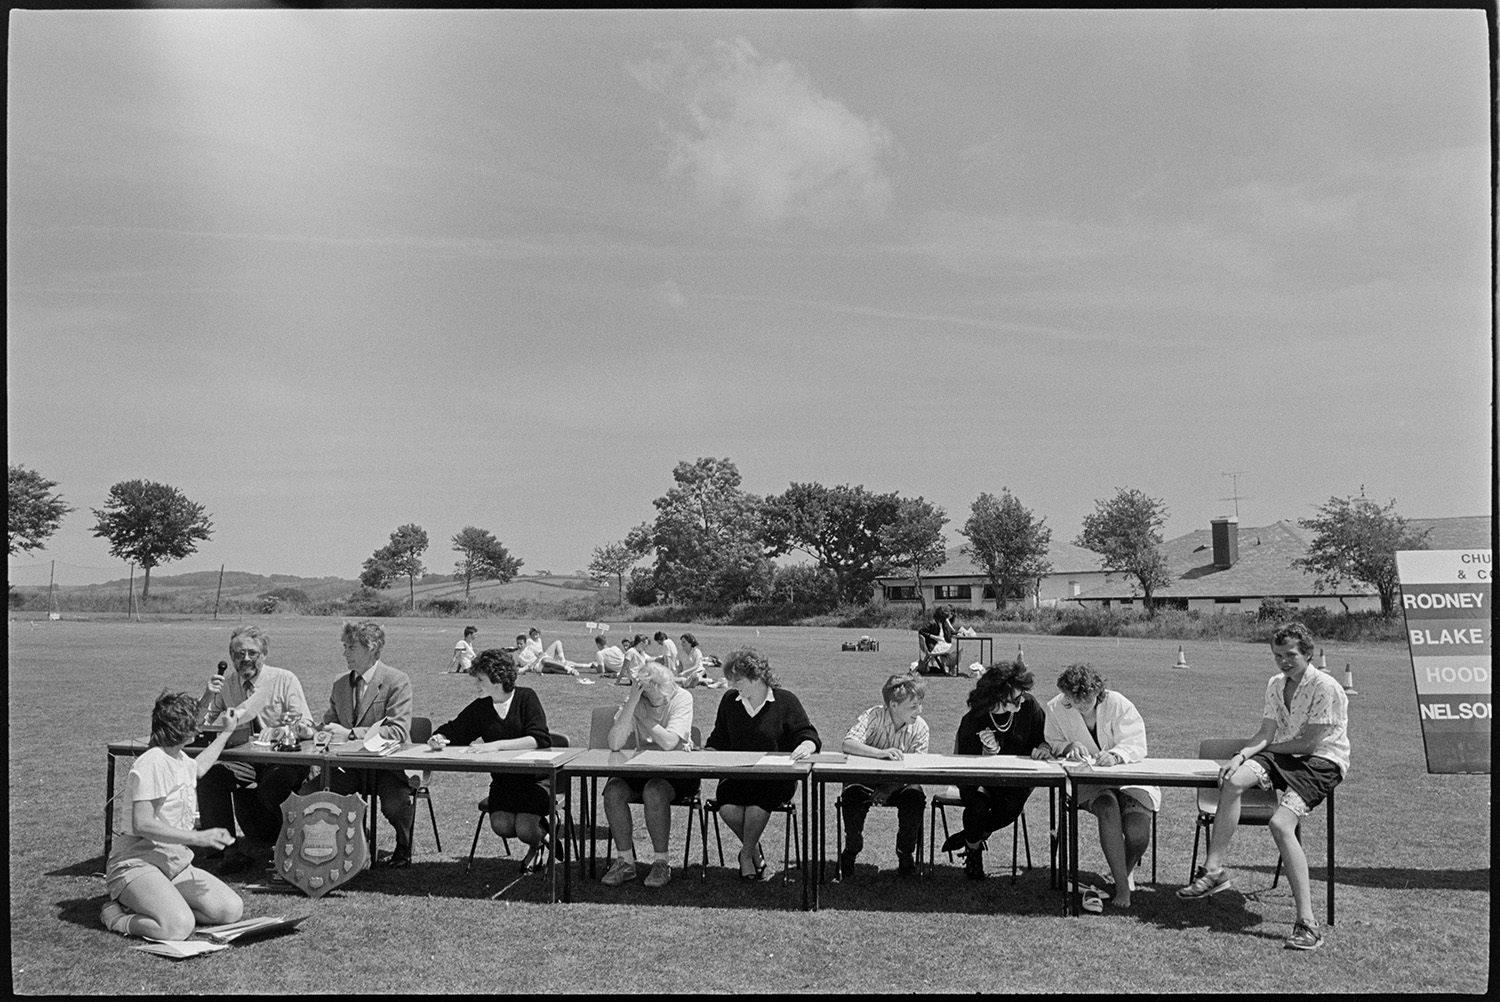 School sports, pupils gathered for prize giving, crowd.
[An announcer with a microphone and scorekeepers sitting at a table during a sports day at Chulmleigh Community College. There is a scoreboard alongside the table, with a shield and trophies on display. Pupils are sitting on the grass behind the table and some of the school building is visible in the background.]